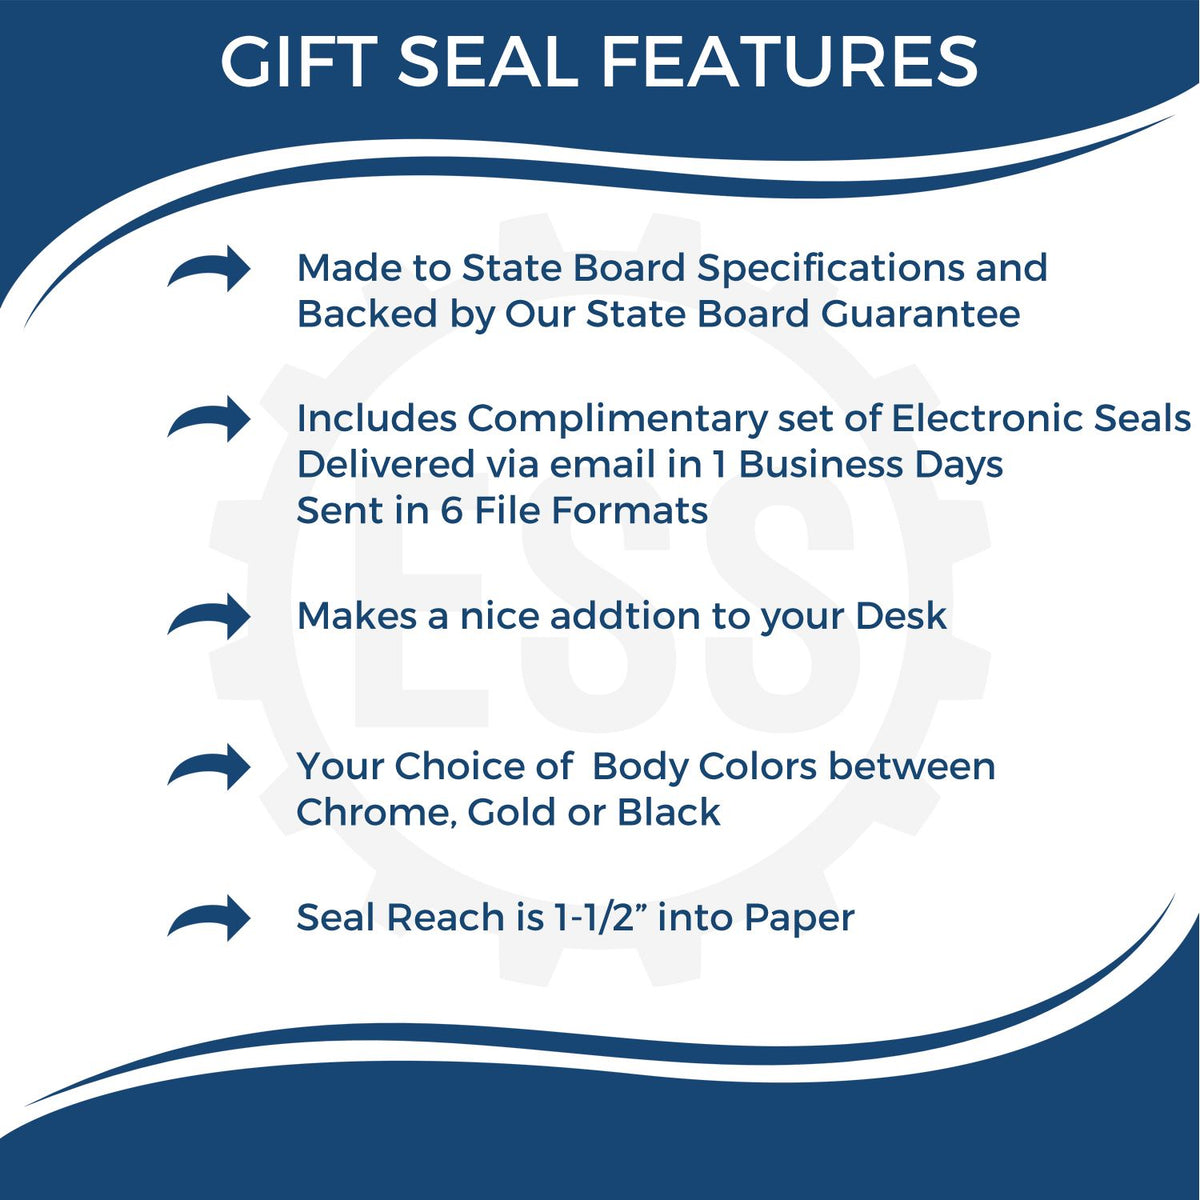 A picture of an infographic highlighting the selling points for the Gift North Dakota Engineer Seal